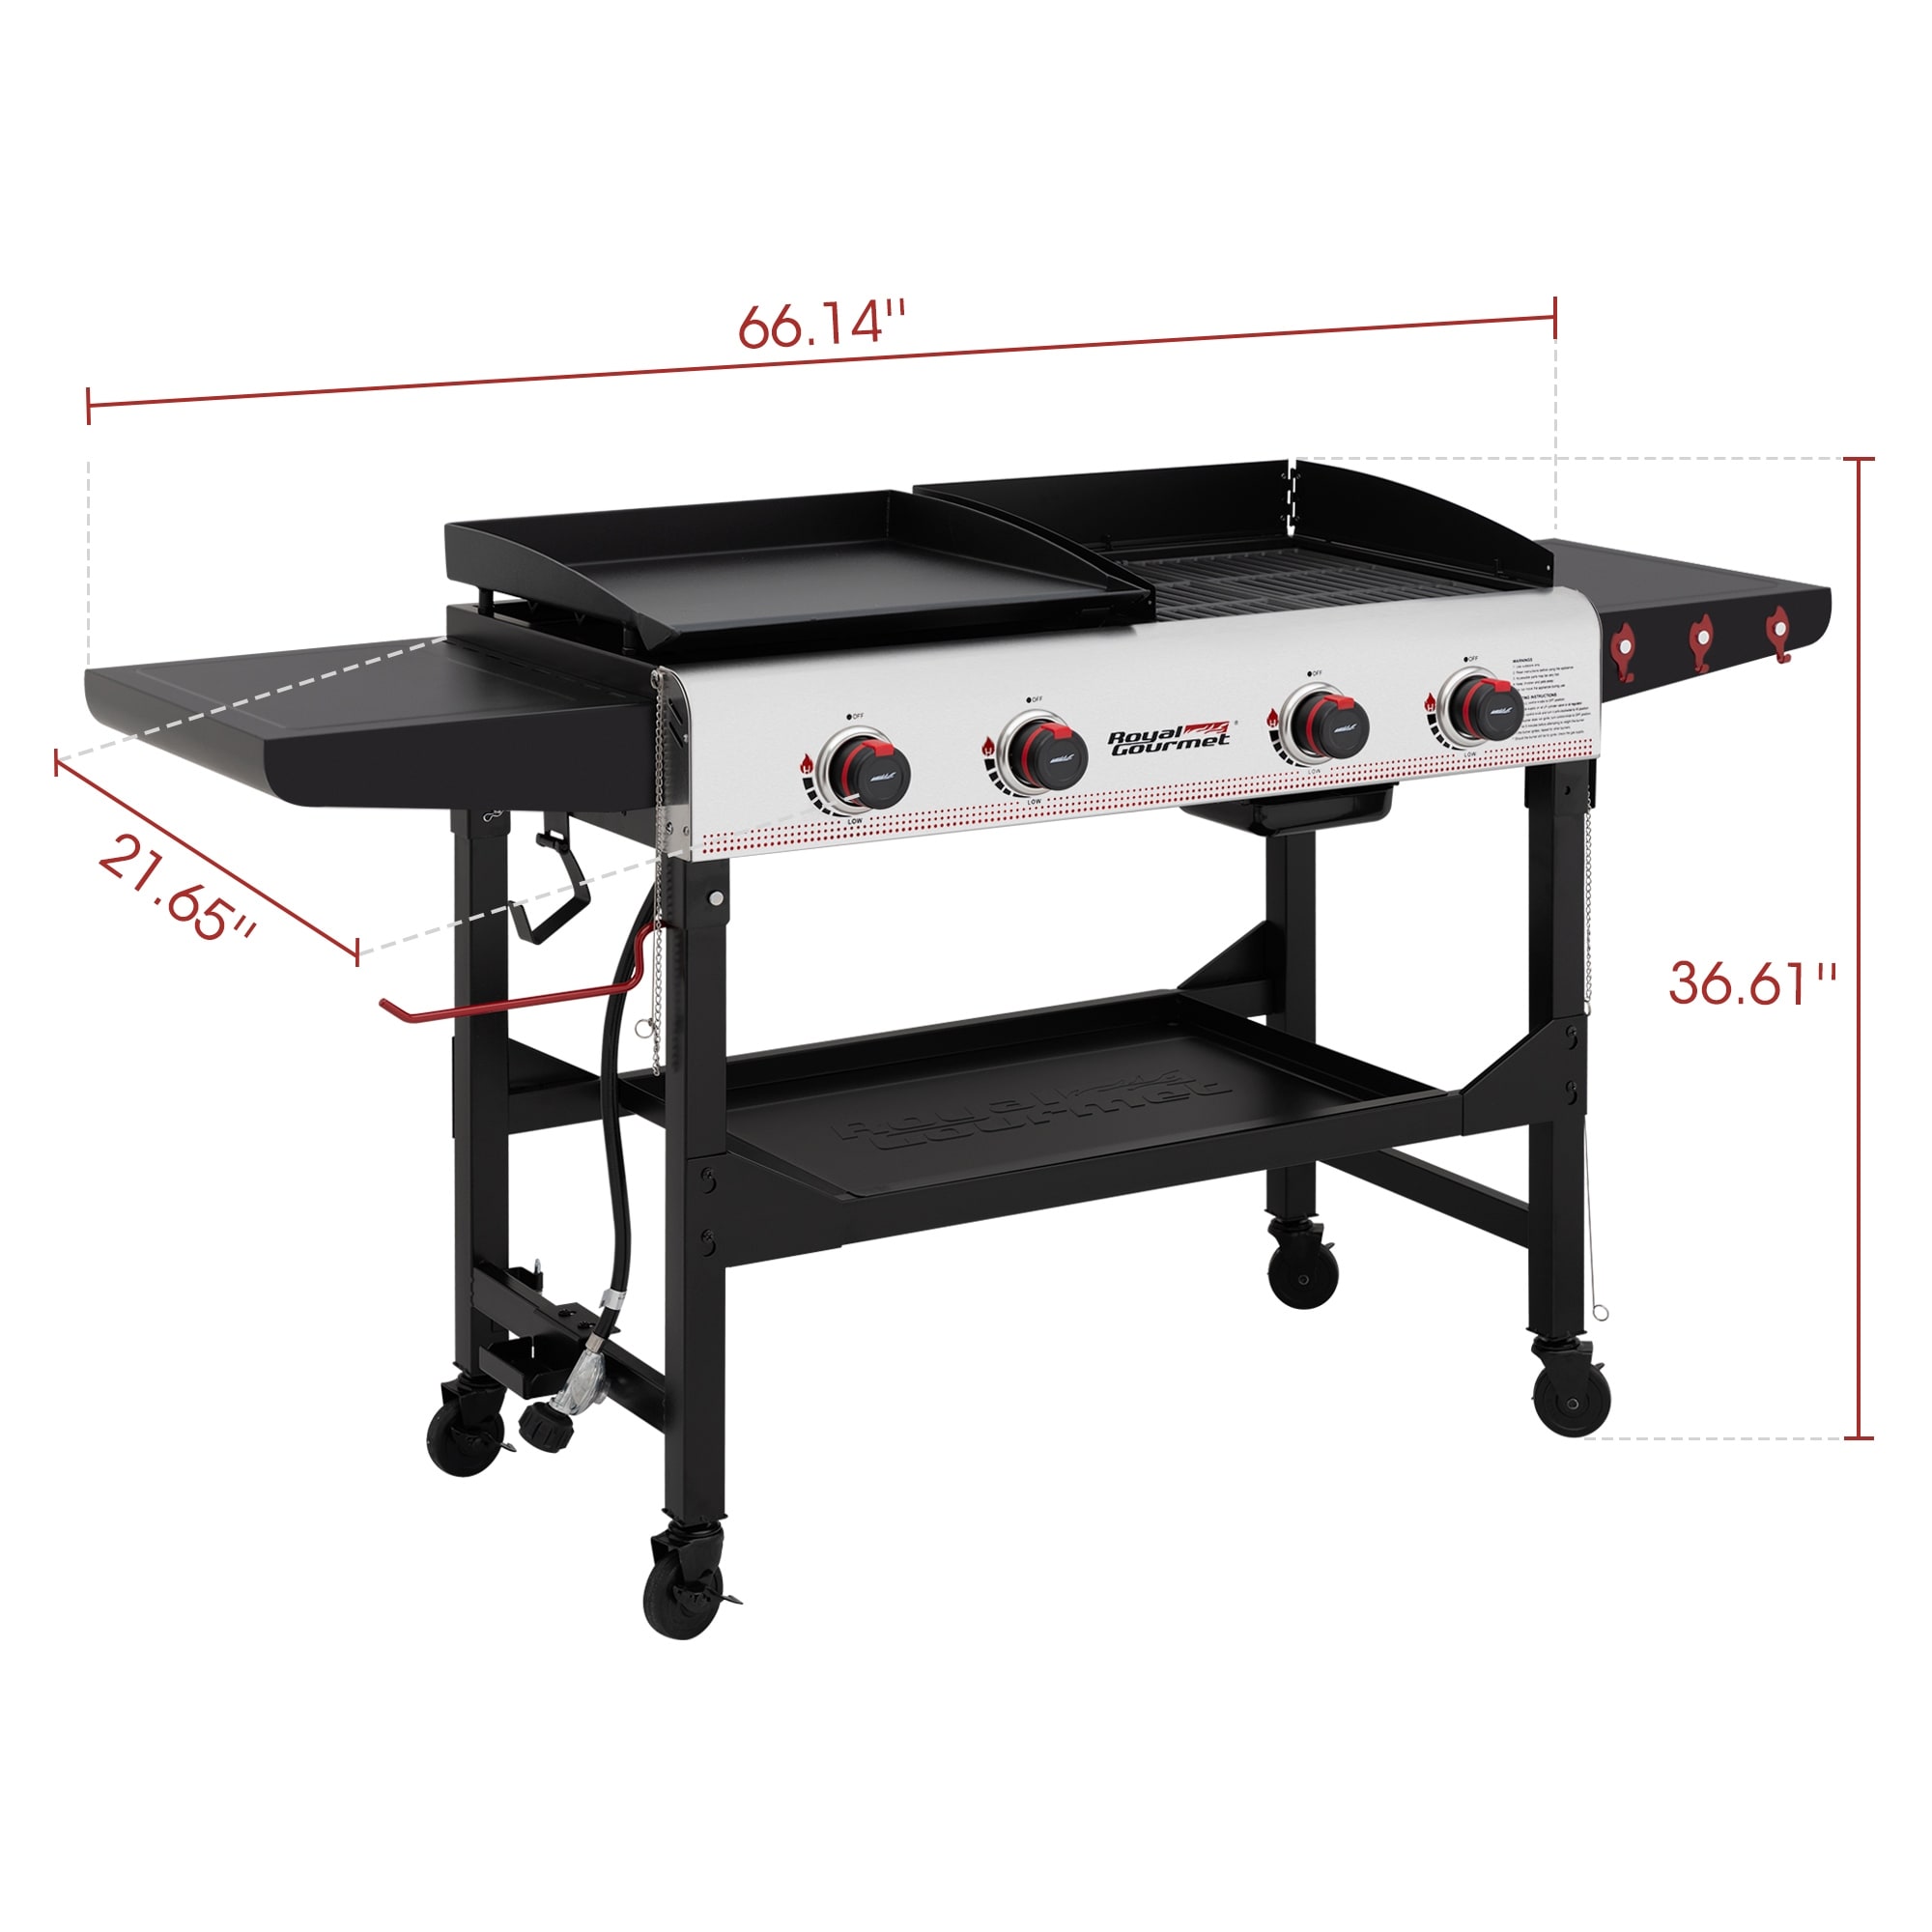 https://ak1.ostkcdn.com/images/products/is/images/direct/a5ea7b01434cb7e3b9b1a546e8a93dae257afee4/Royal-Gourmet-GD403-4-Burner-Portable-Flat-Top-Gas-Grill-and-Griddle-Combo-Grill-with-Folding-Legs%2C-48%2C000-BTU%2C-Black-%26-Silver.jpg